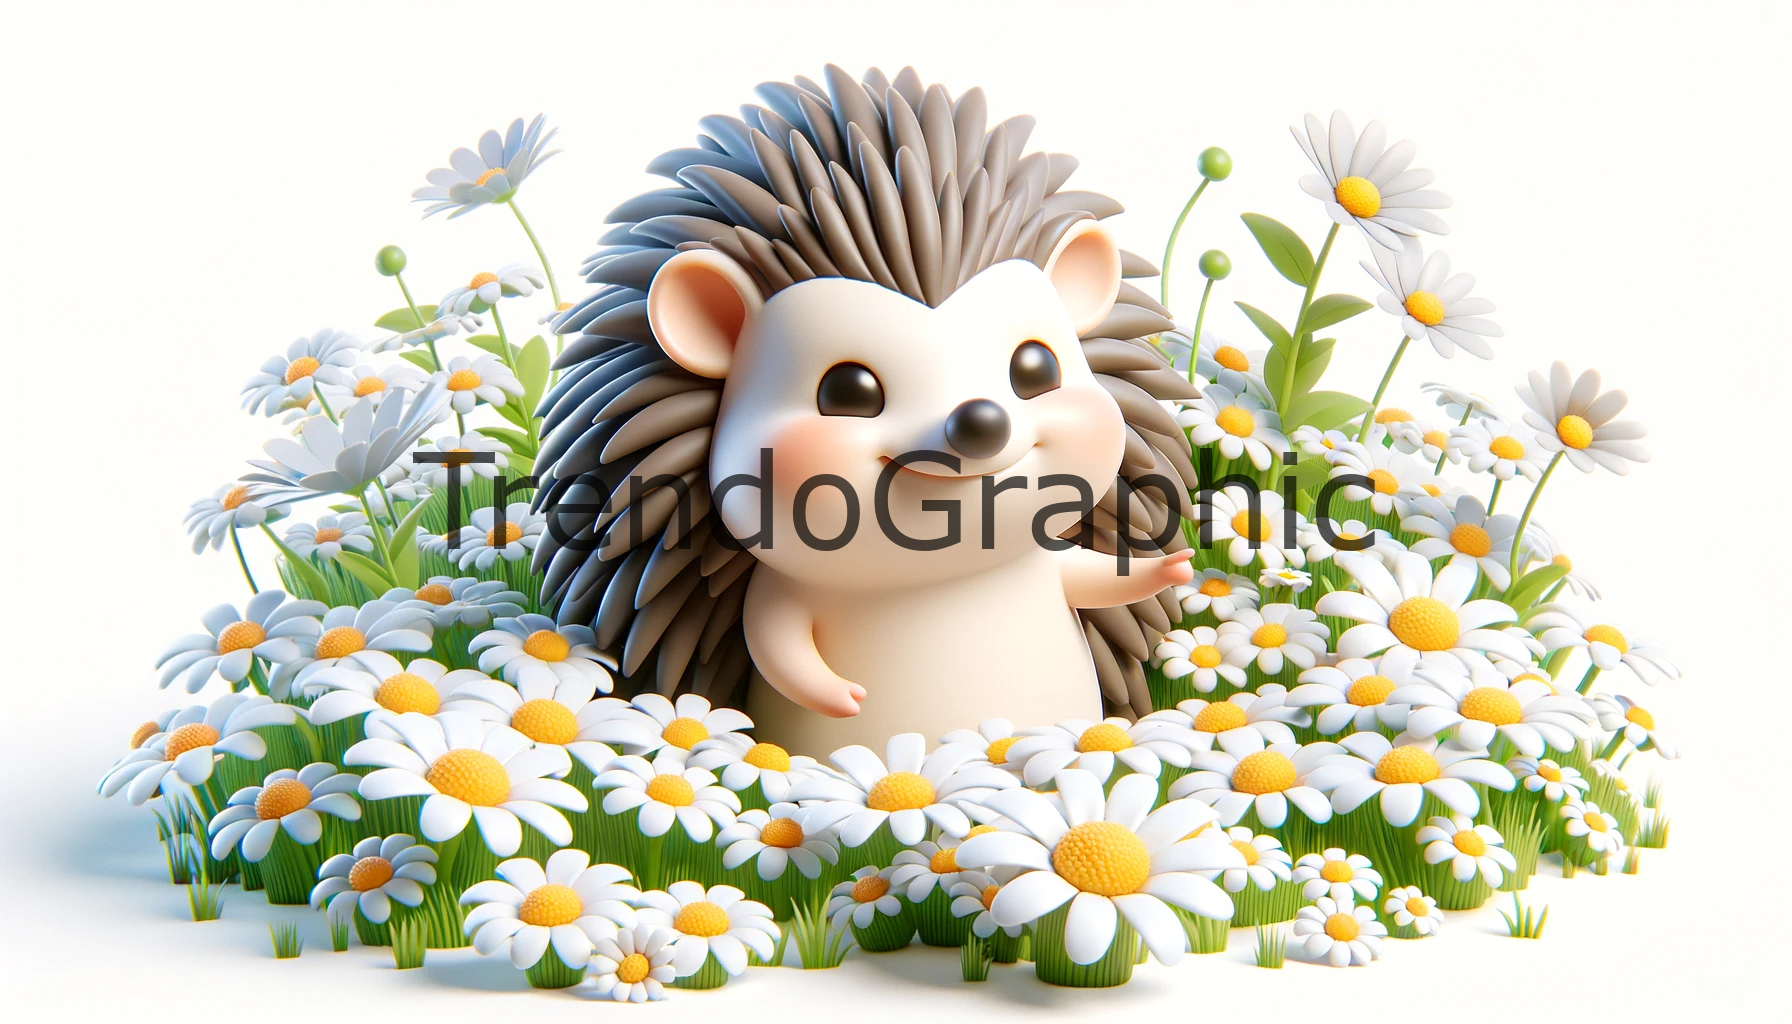 Charming Hedgehog in a Daisy Field: A Whimsical 3D Scene